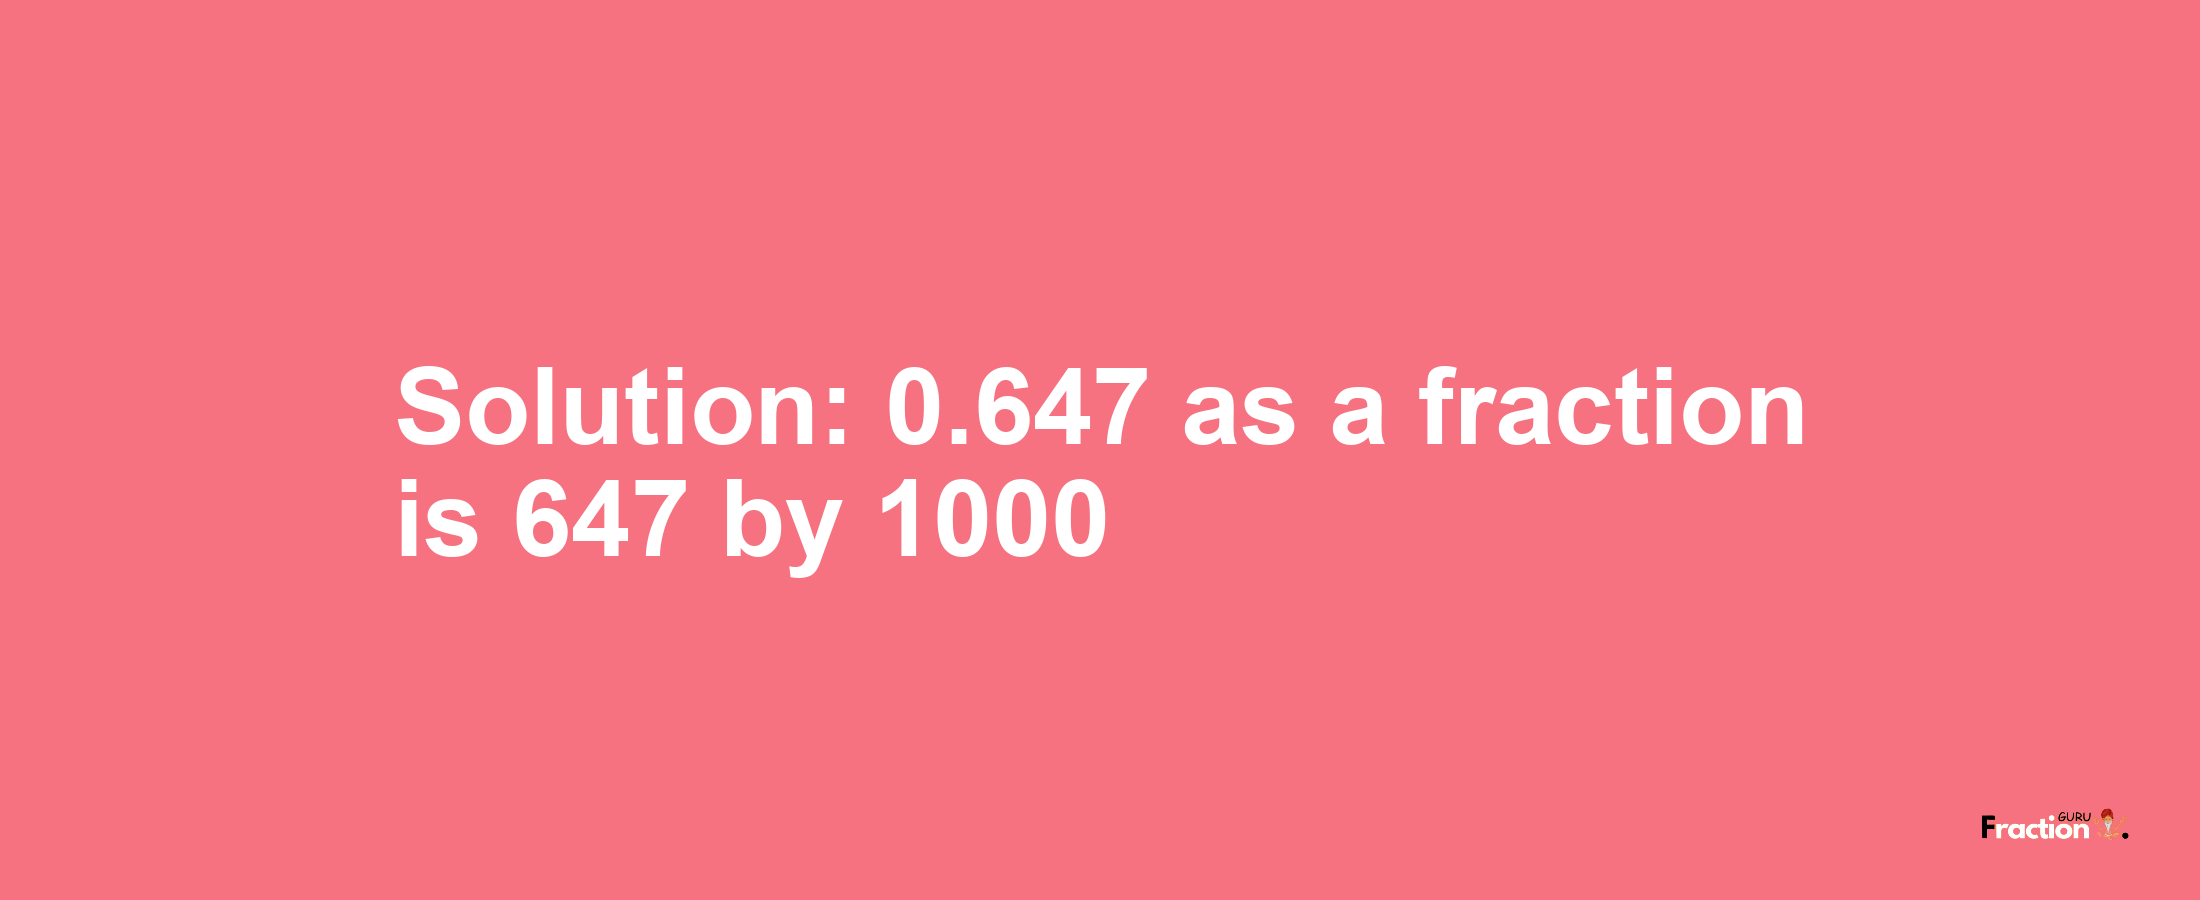 Solution:0.647 as a fraction is 647/1000